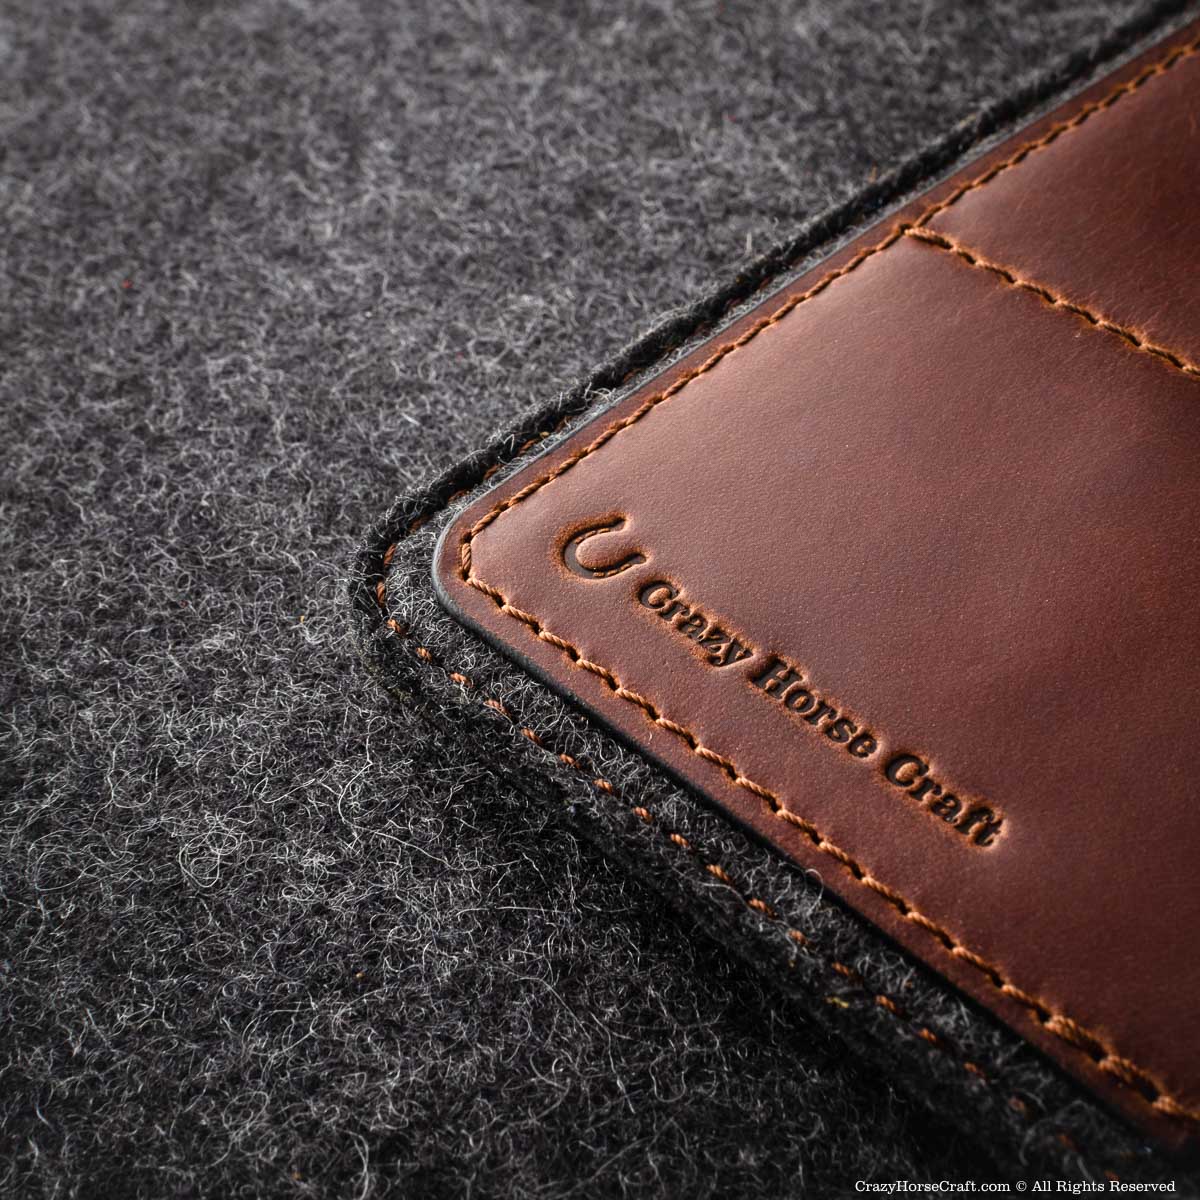 Leather Passport and Vax Card Holder – Rustico Corporate